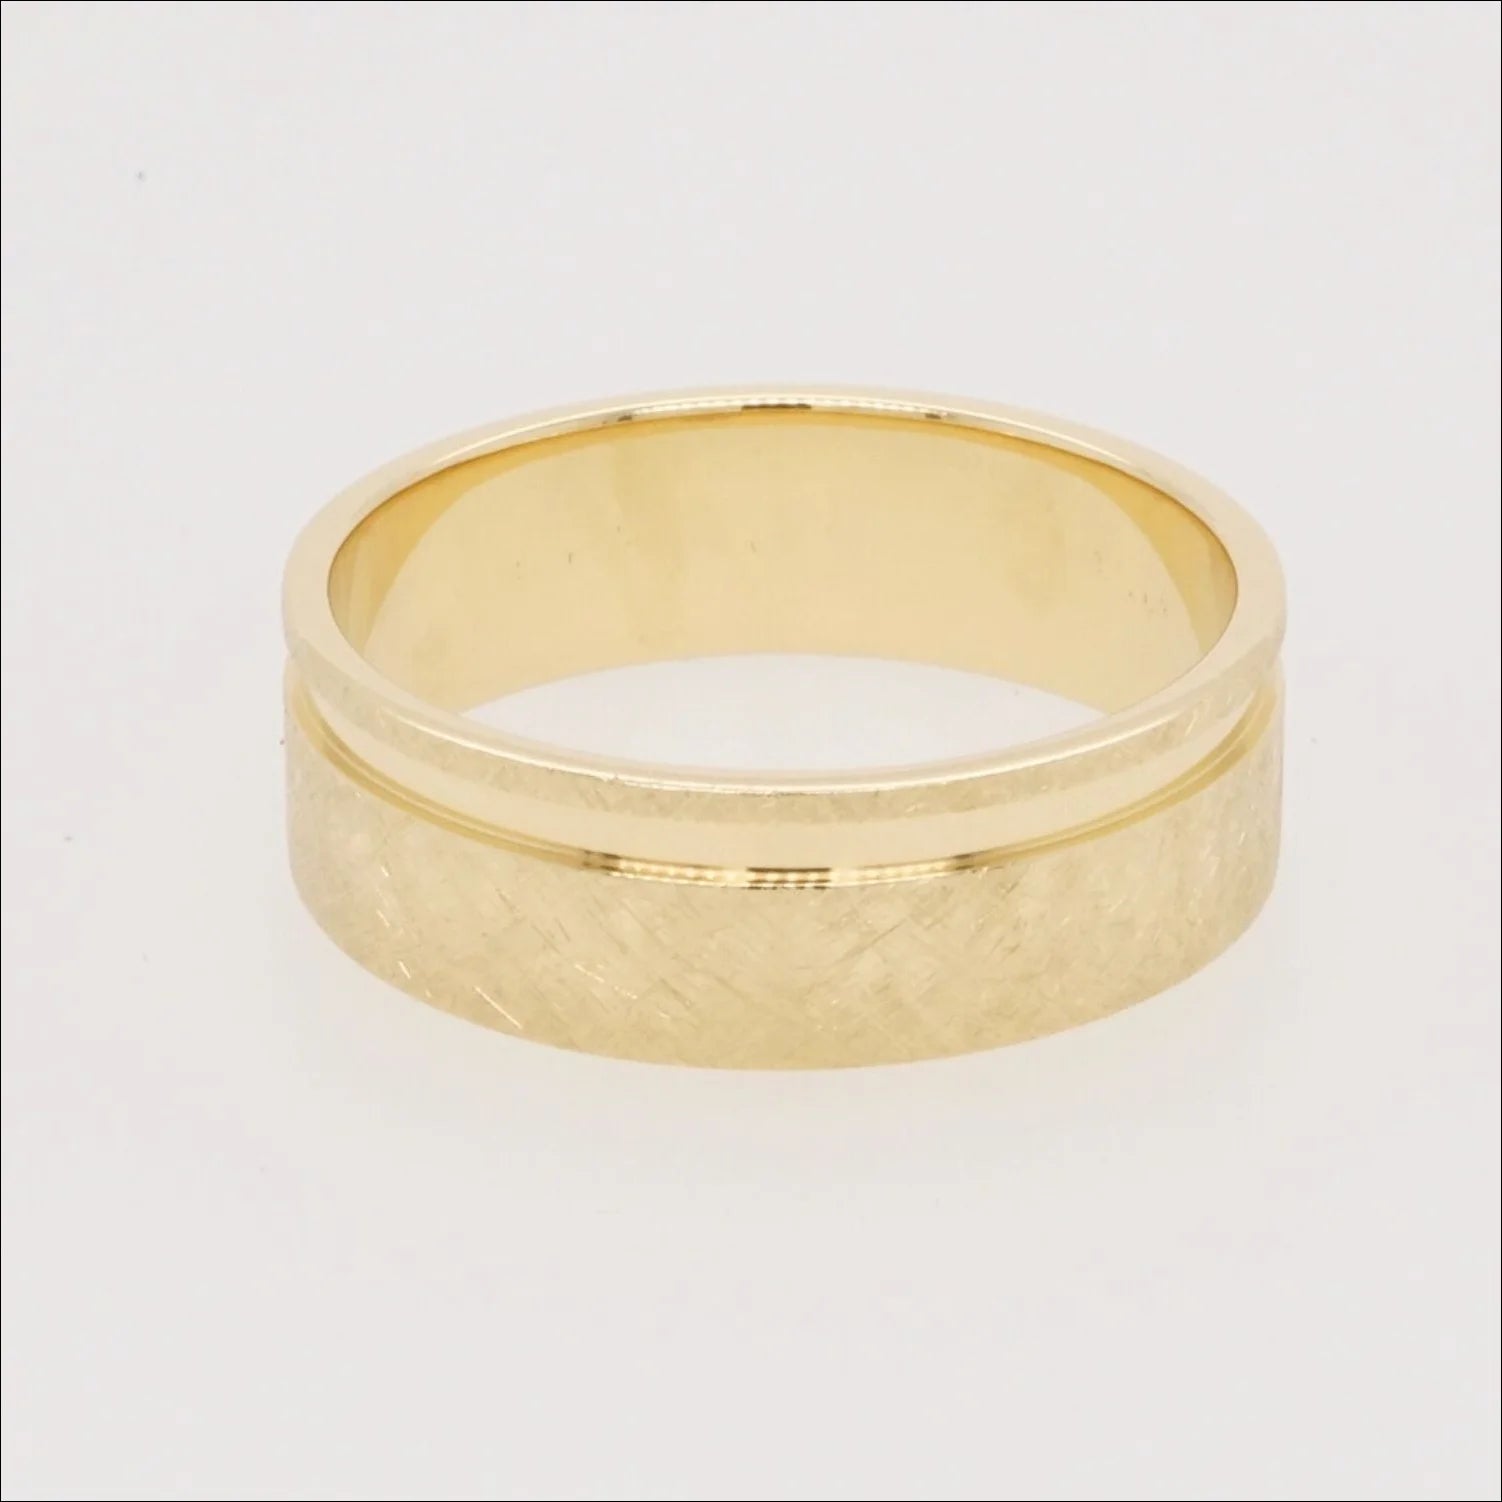 Elegant 18k Gold Diamond Wedding Band for Her | Home page